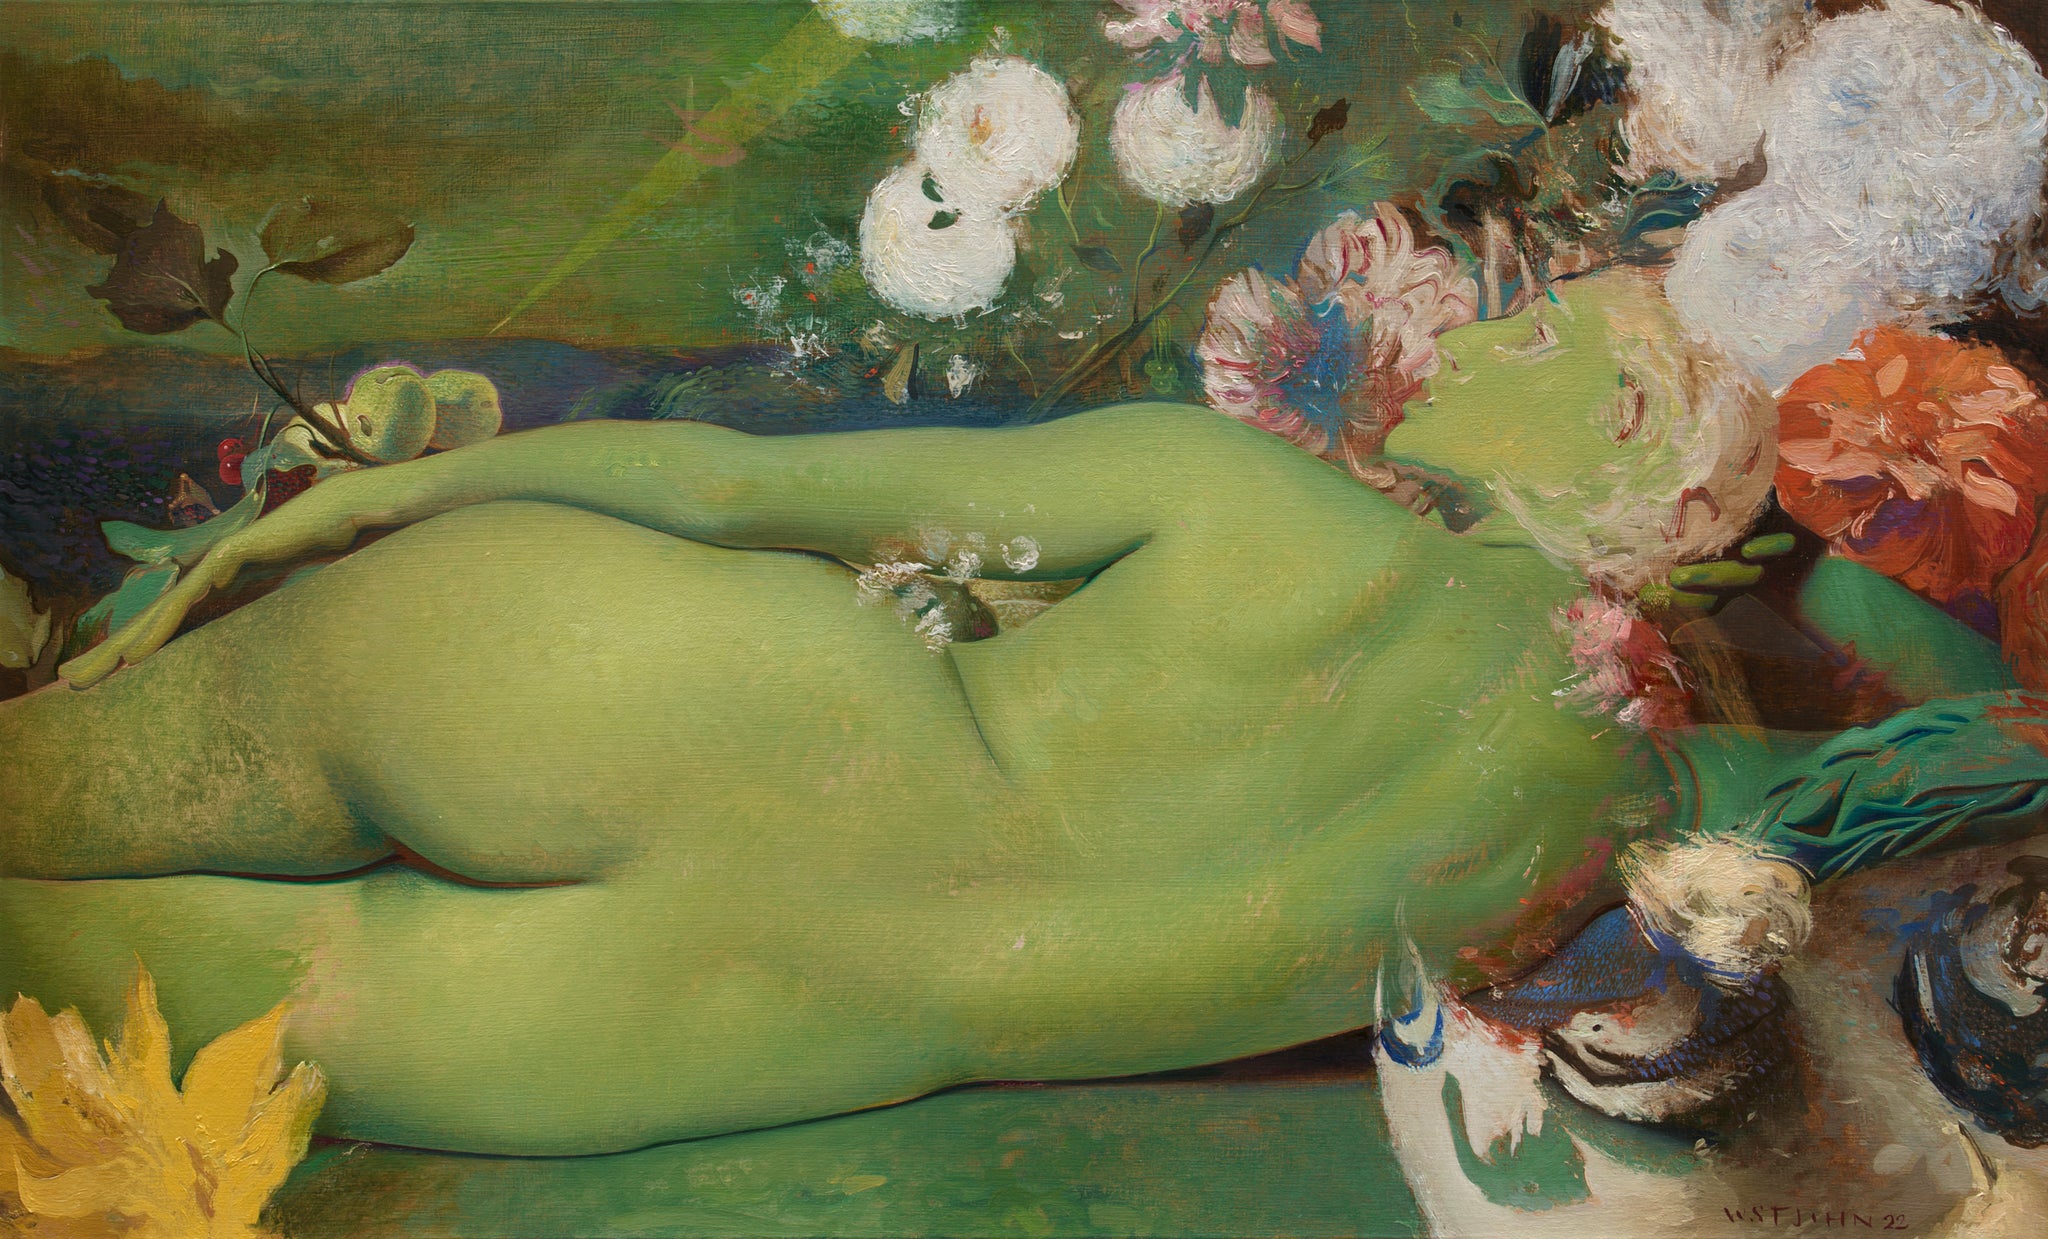 Will St. John, "Green Nude with Search Light"